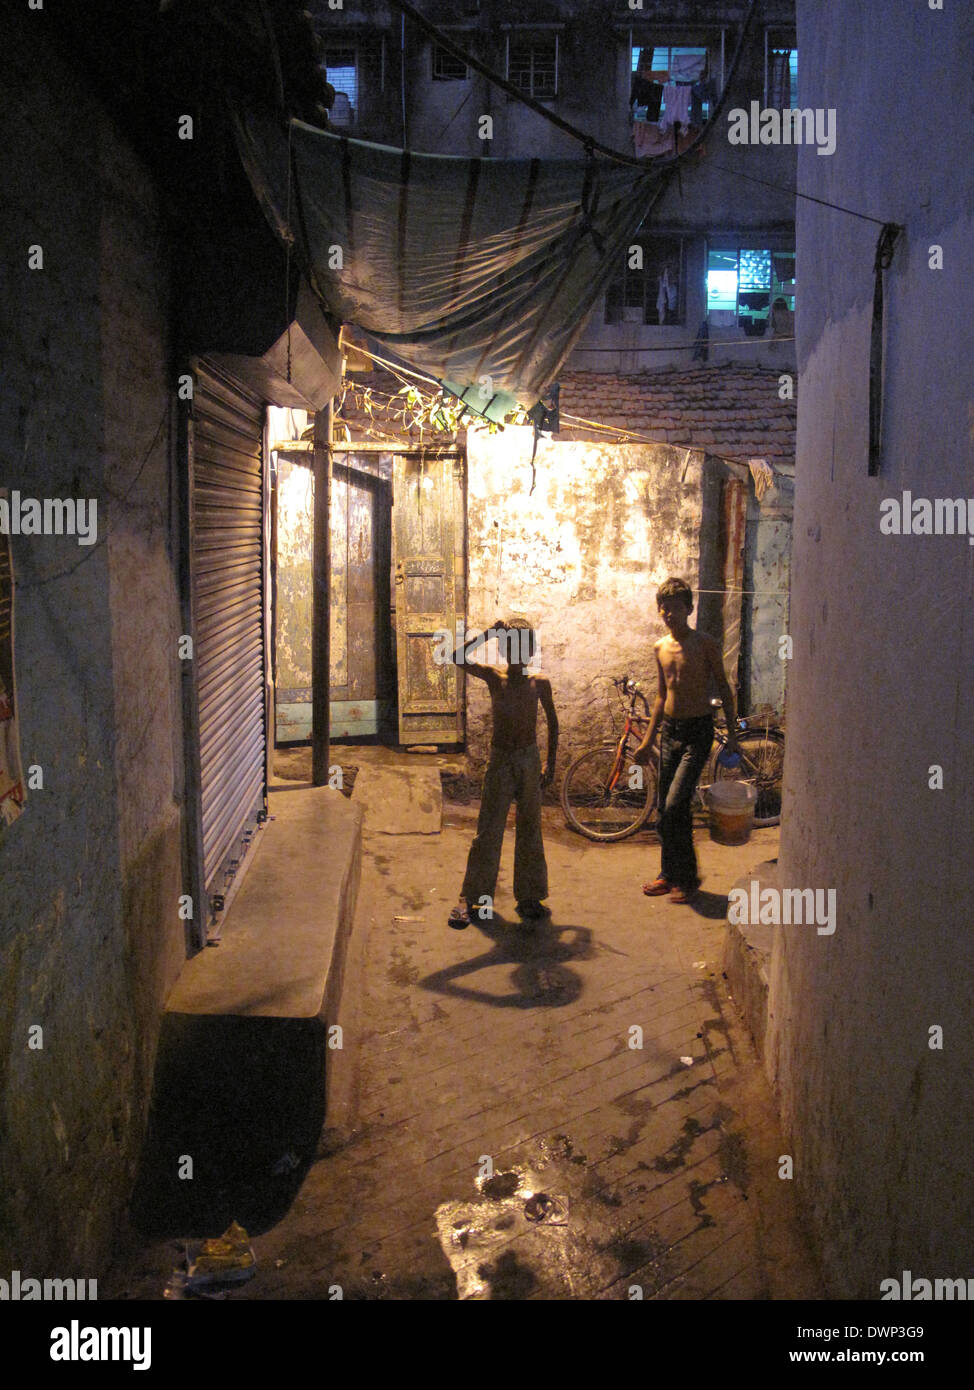 Streets of Kolkata. People live and work on the streets in Kolkata, India Stock Photo